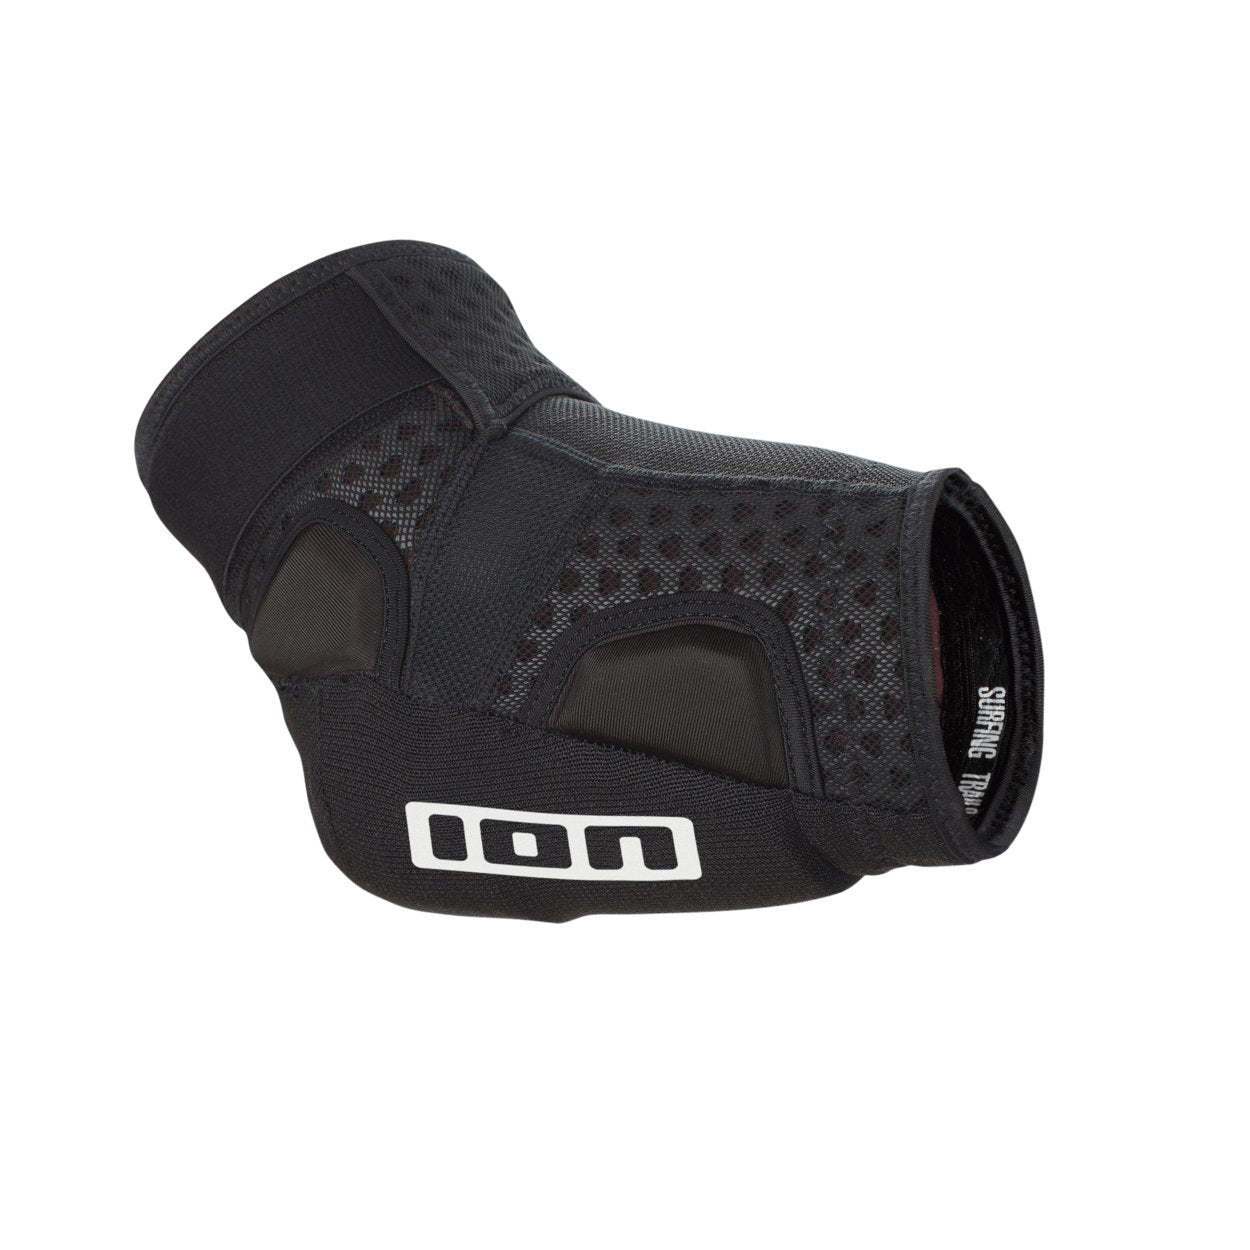 ION MTB Elbow Pads E-Pact 2024 - Worthing Watersports - 9008415761876 - Body Armor - ION Bike